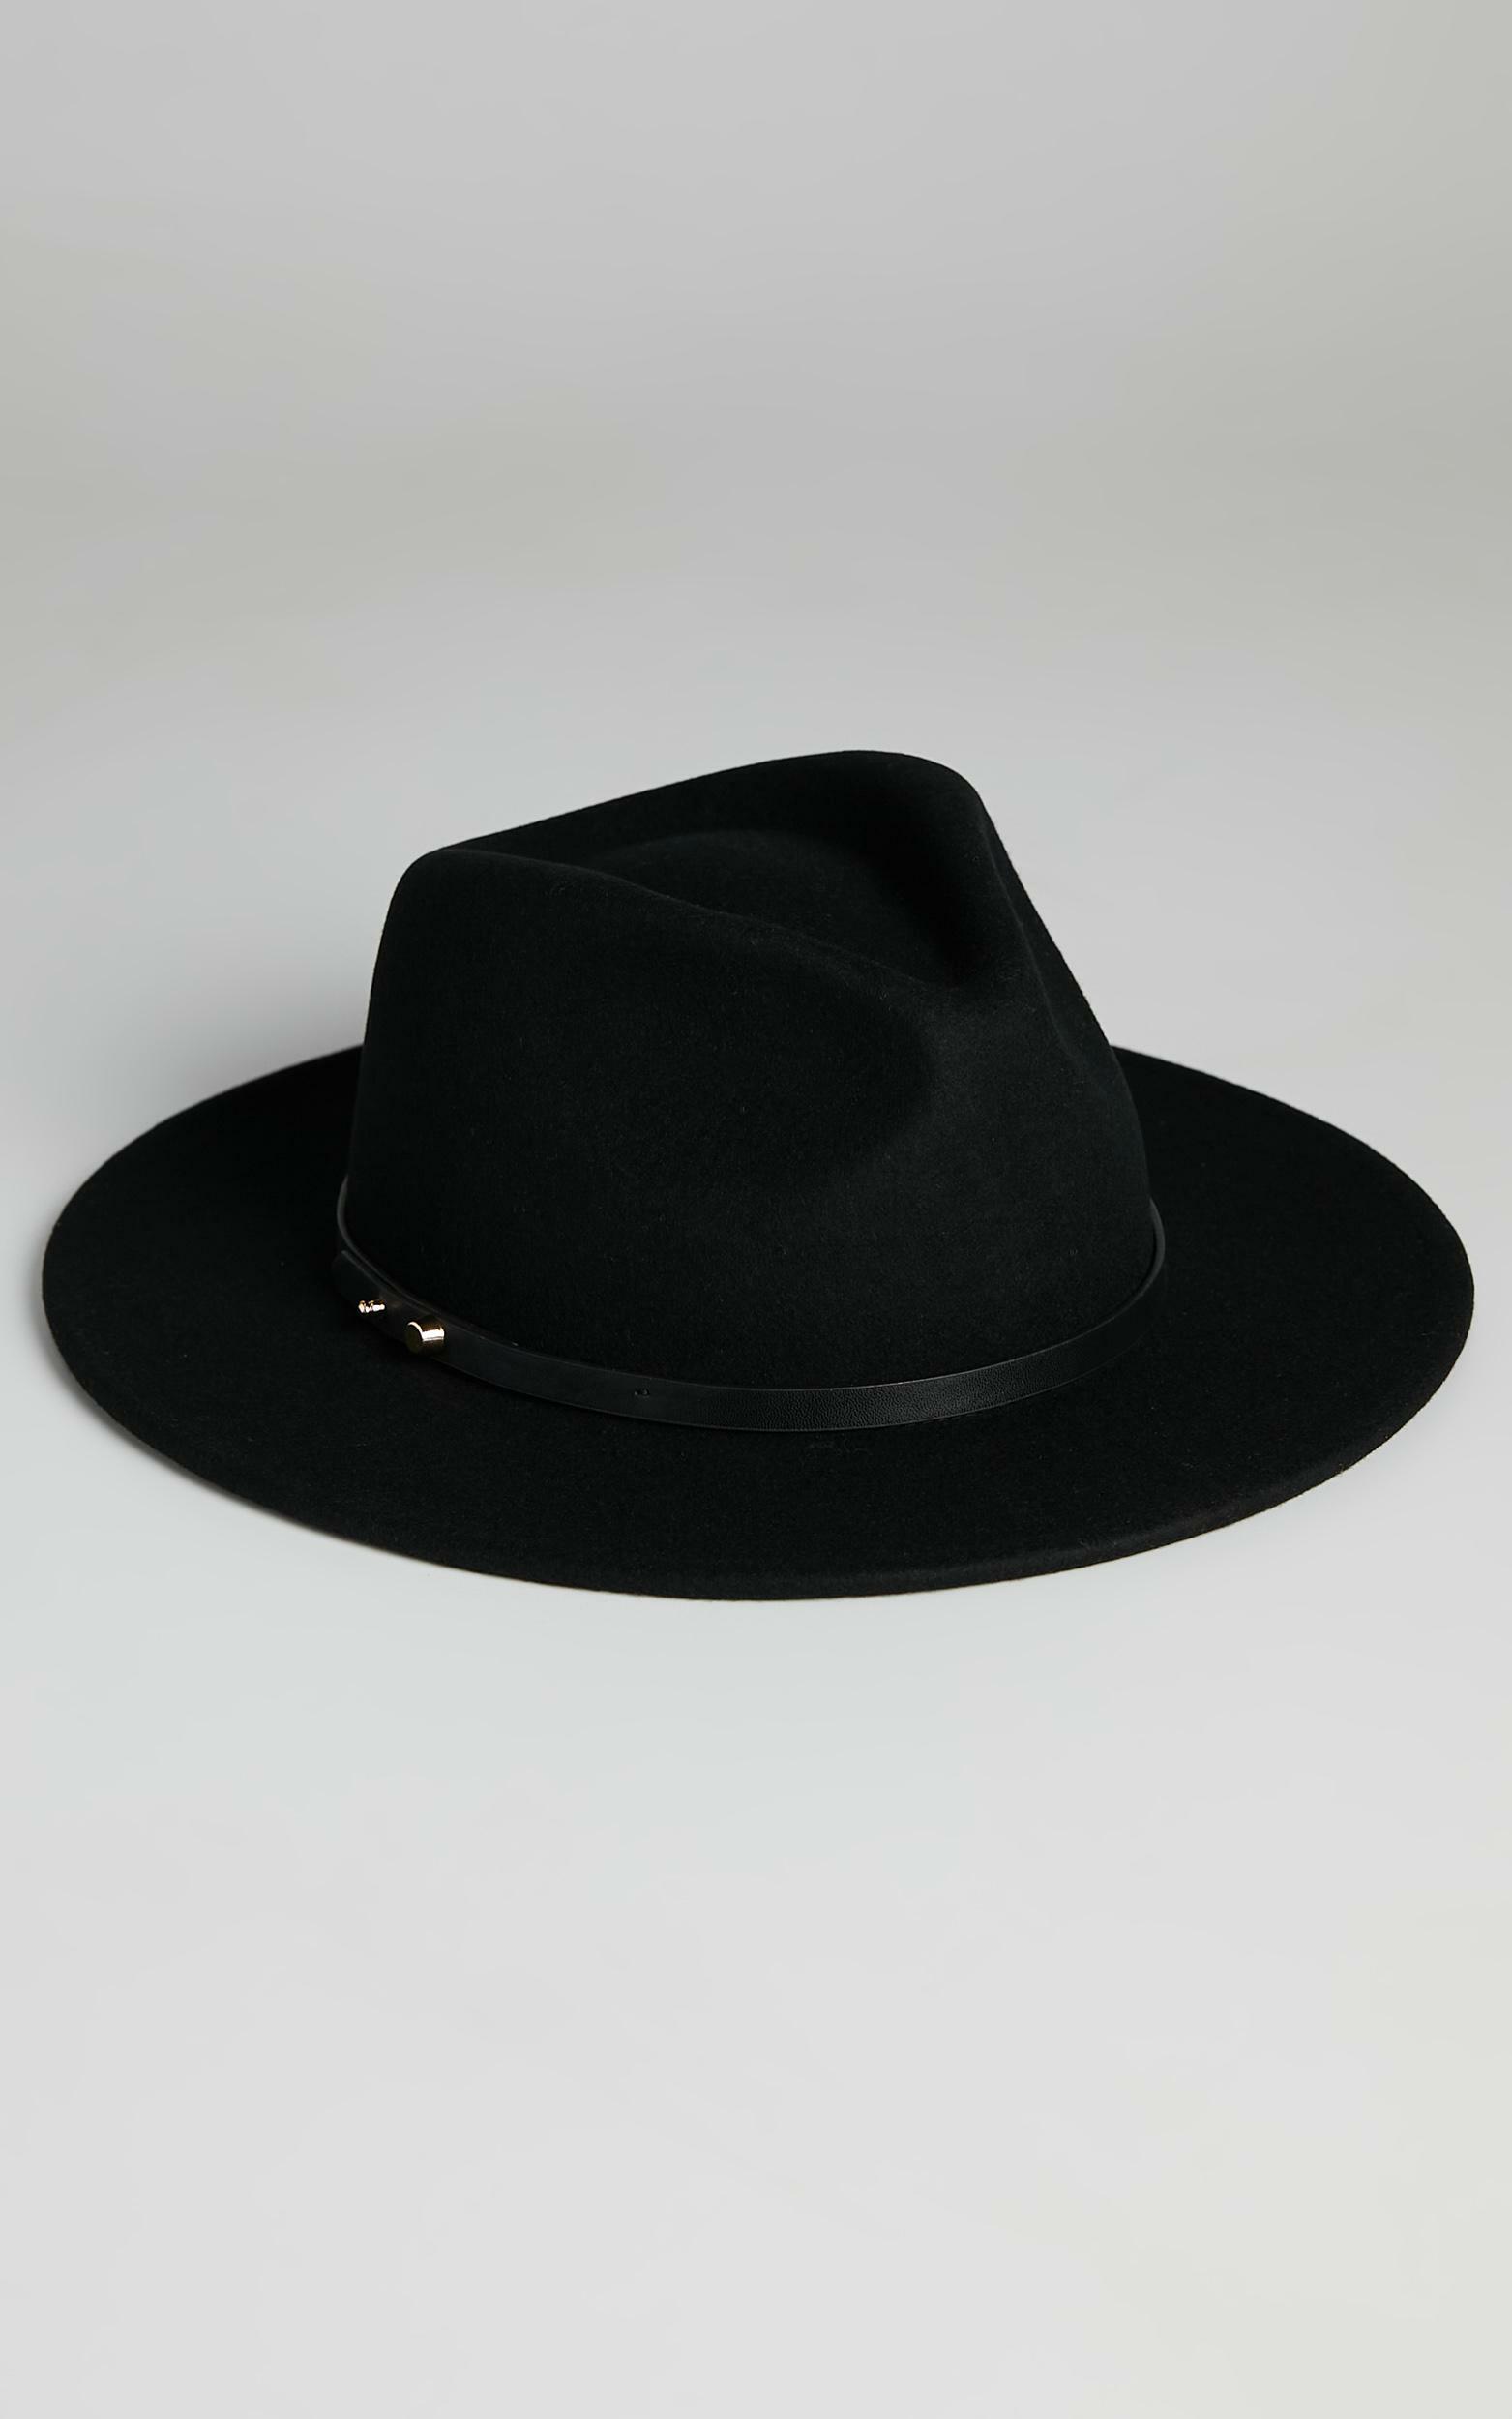 Ace of Something - Oslo Hat in Black, BLK1, hi-res image number null